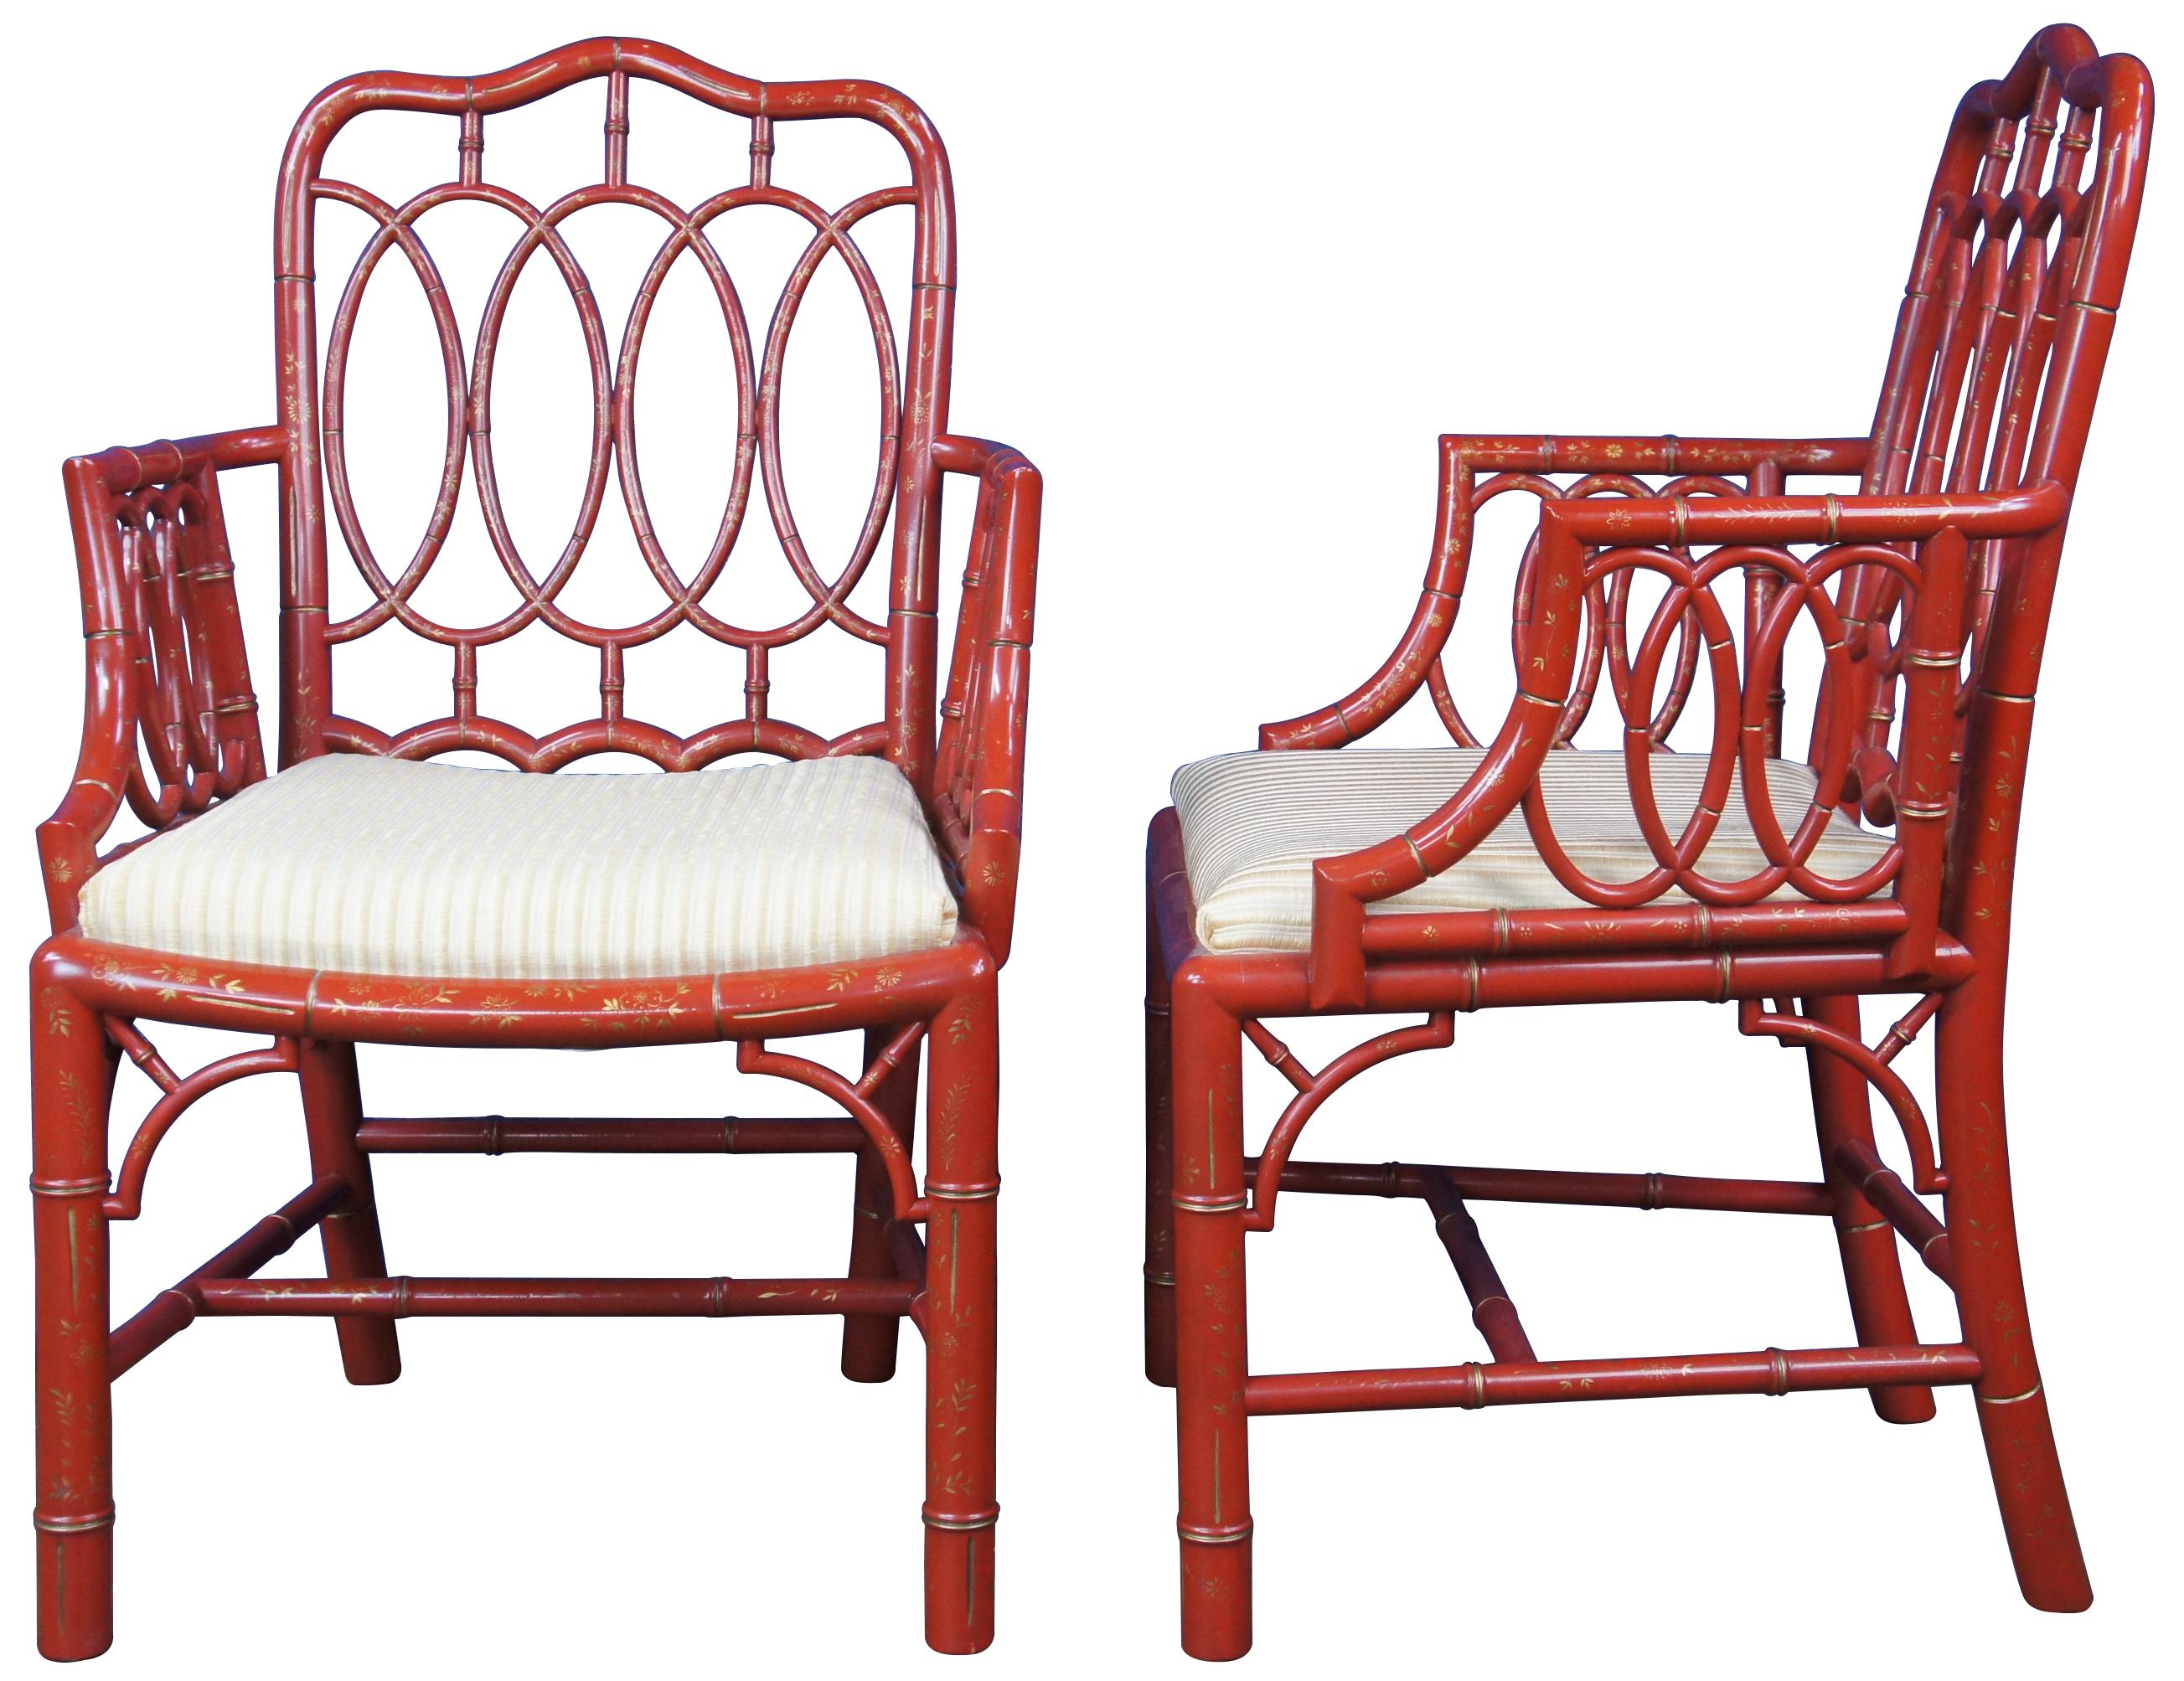 A rare and important set of 8 Baker Furniture Chinese Chippendale Loop or Hoop back dining armchairs, circa mid 20th century Featuring faux bamboo pierced bentwood frame with red lacquer finish and hand painted gilt floral accents. An archive style